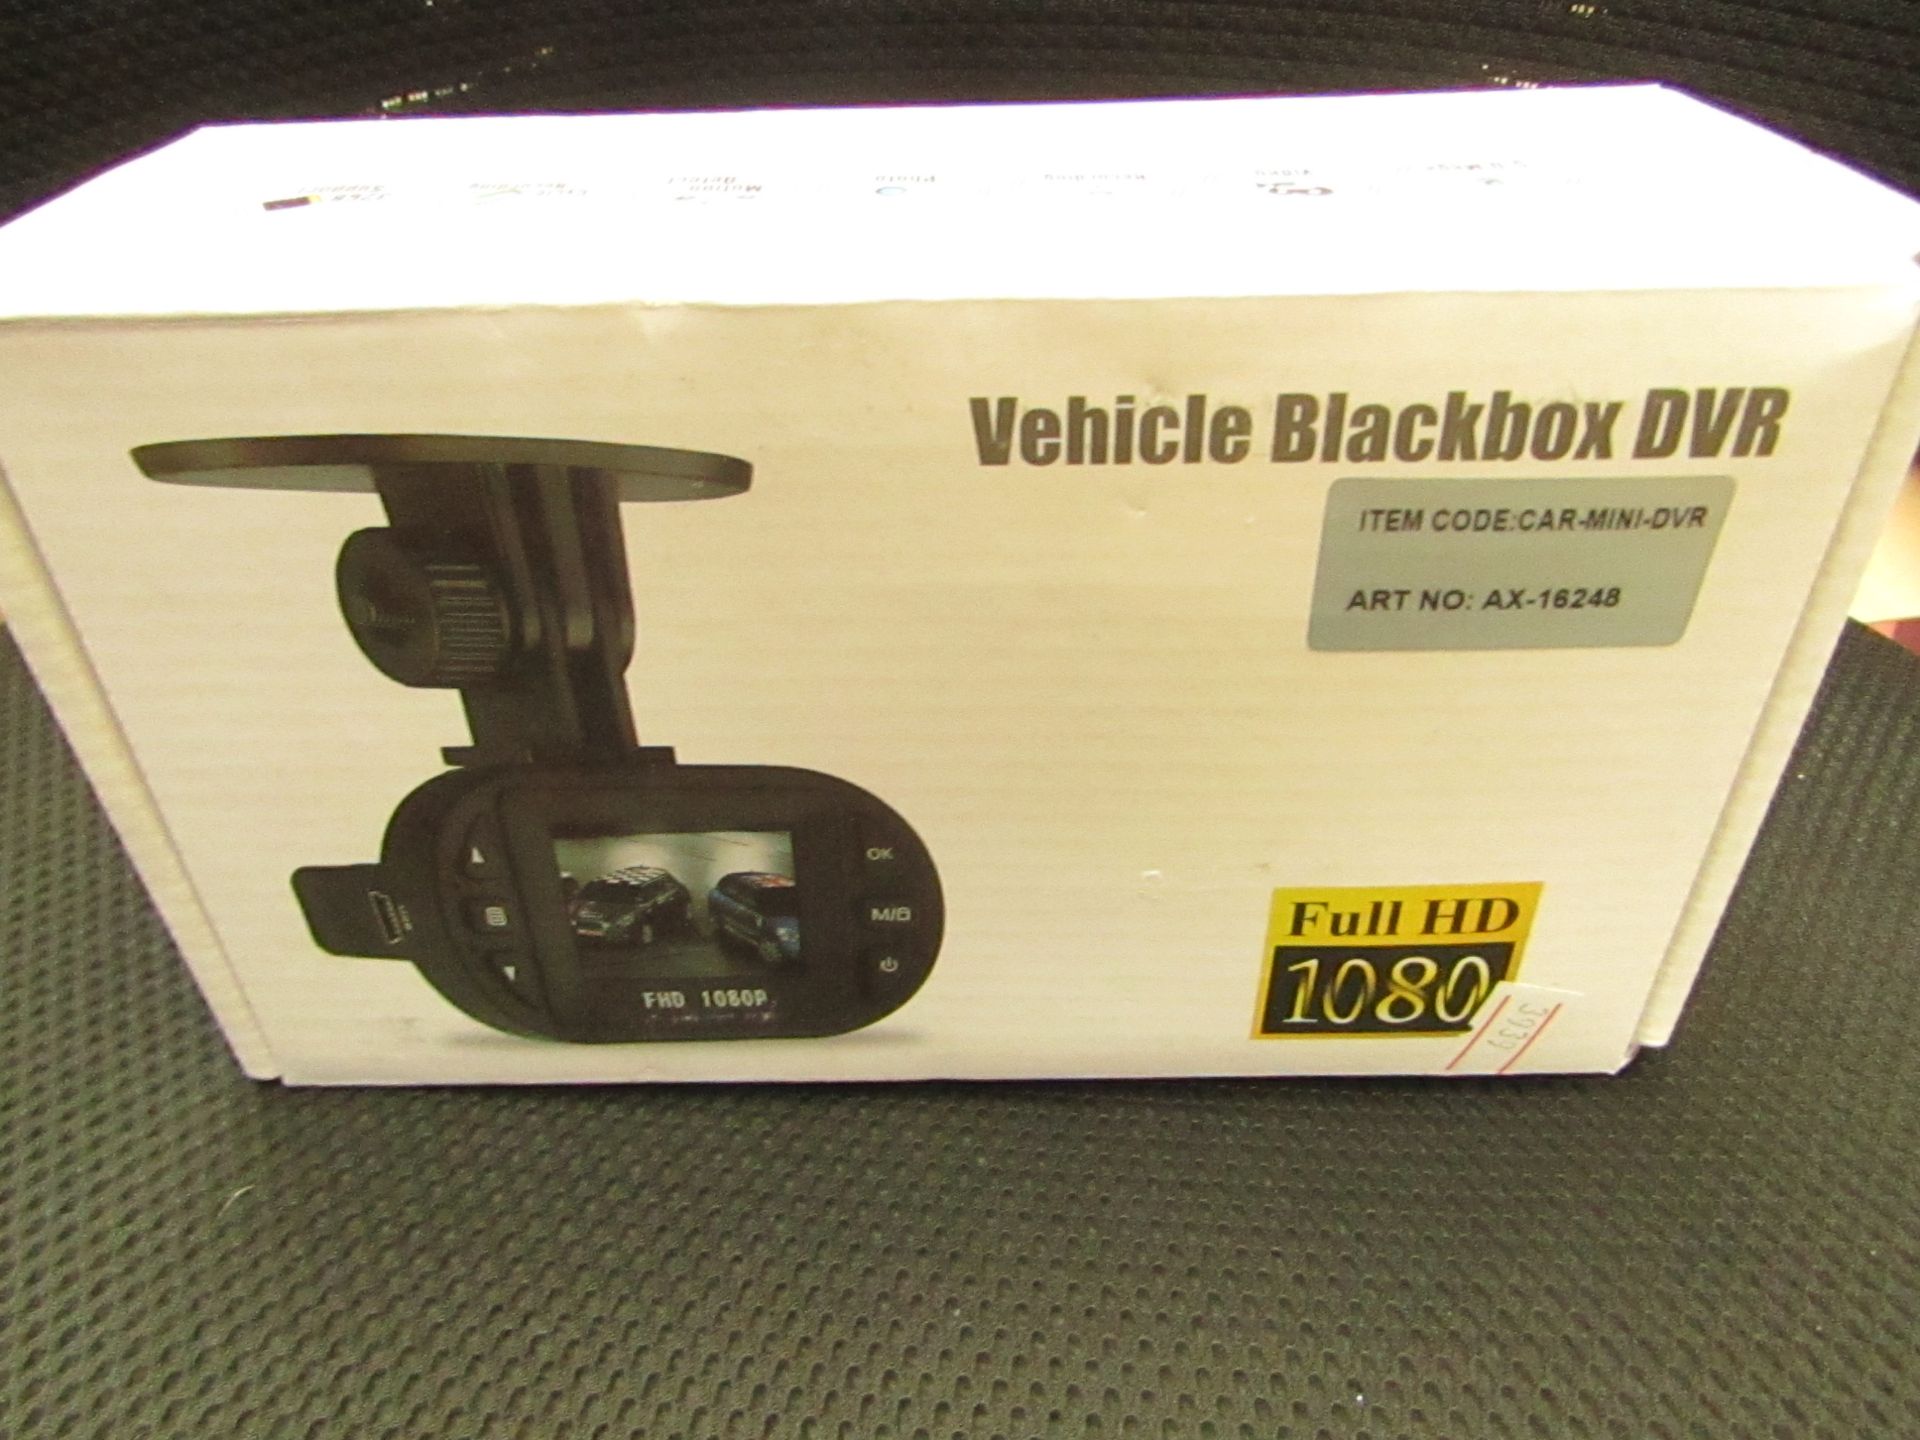 Vehicle Blackbox DVR, Full HD 1080, Boxed & Unchecked